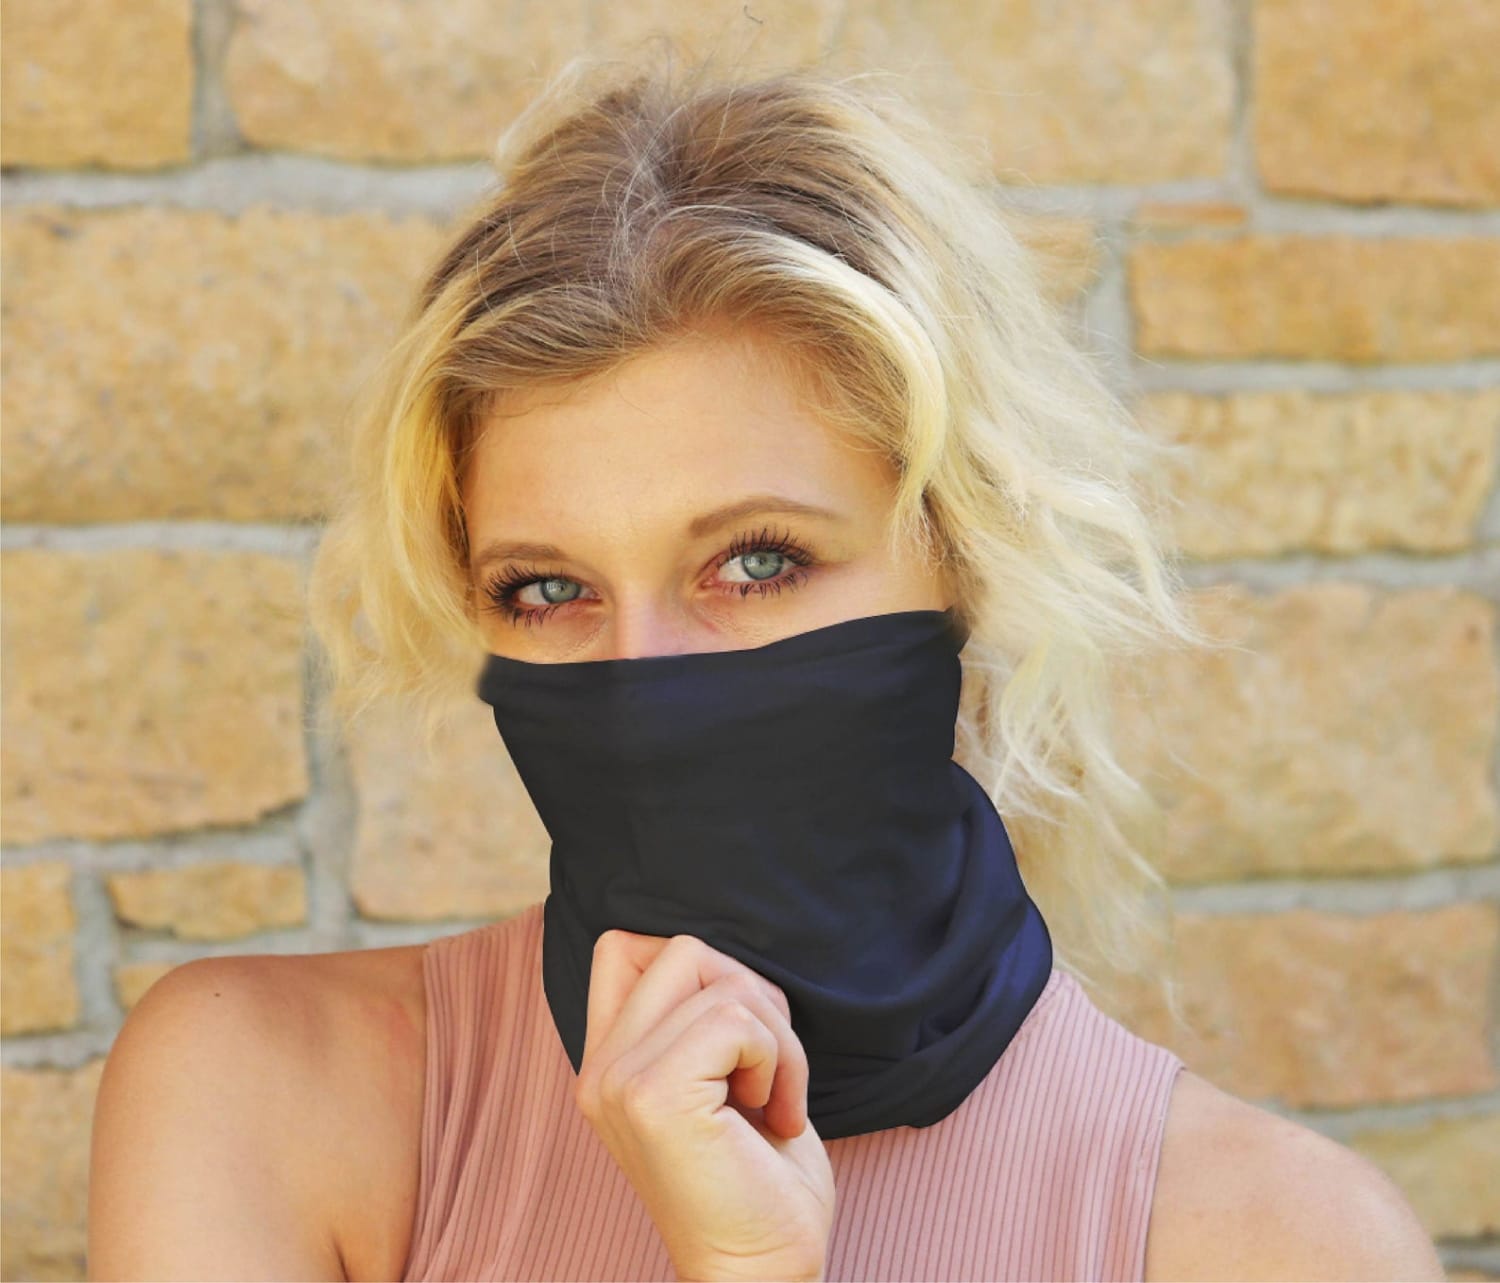 How to wear a neck gaiter to protect against Covid